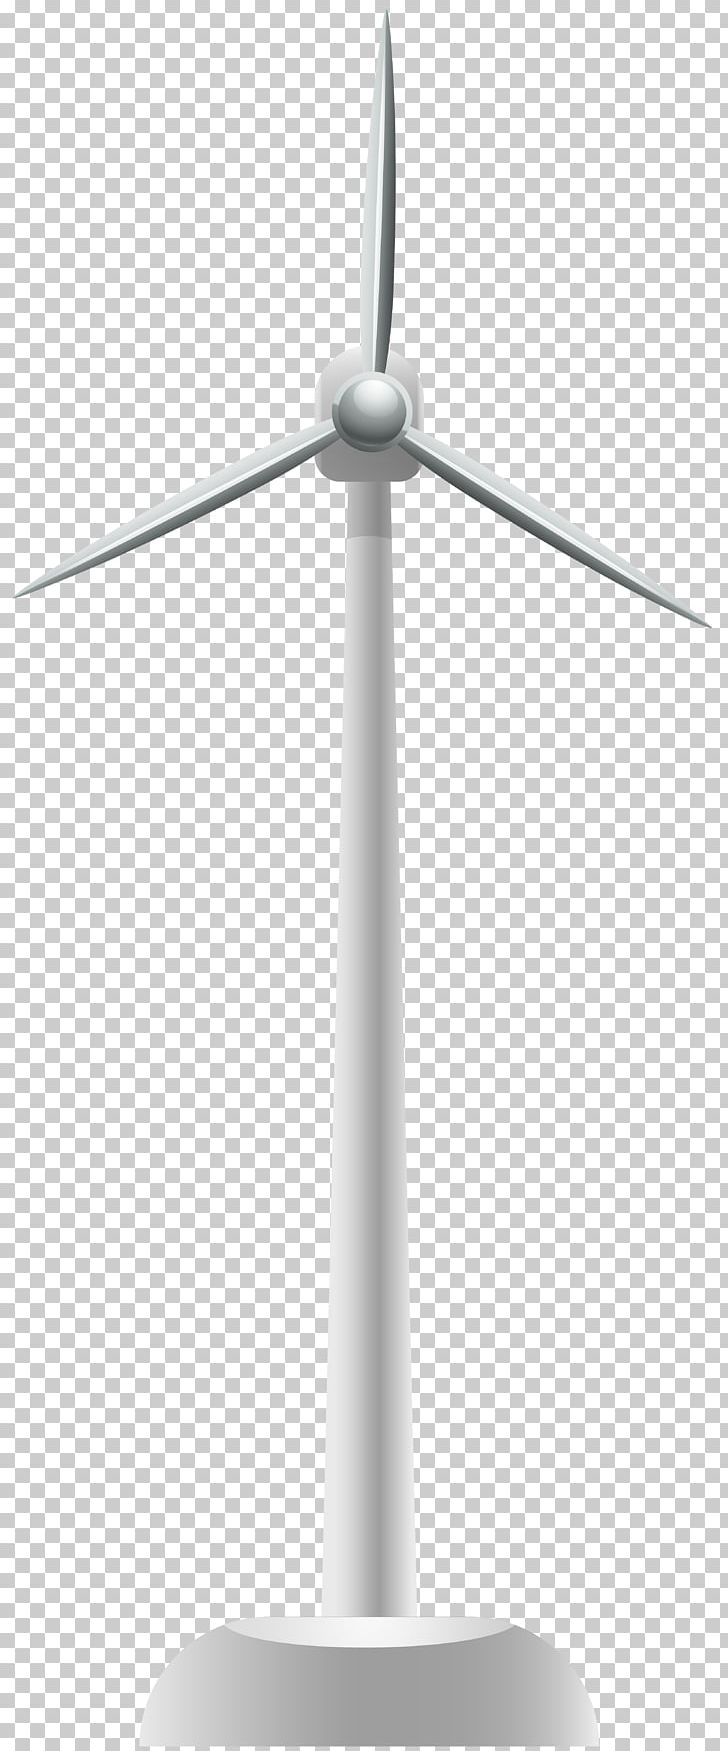 Wind Farm Wind Turbine Windmill PNG, Clipart, Computer Icons, Electric Generator, Energy, Ico, Machine Free PNG Download